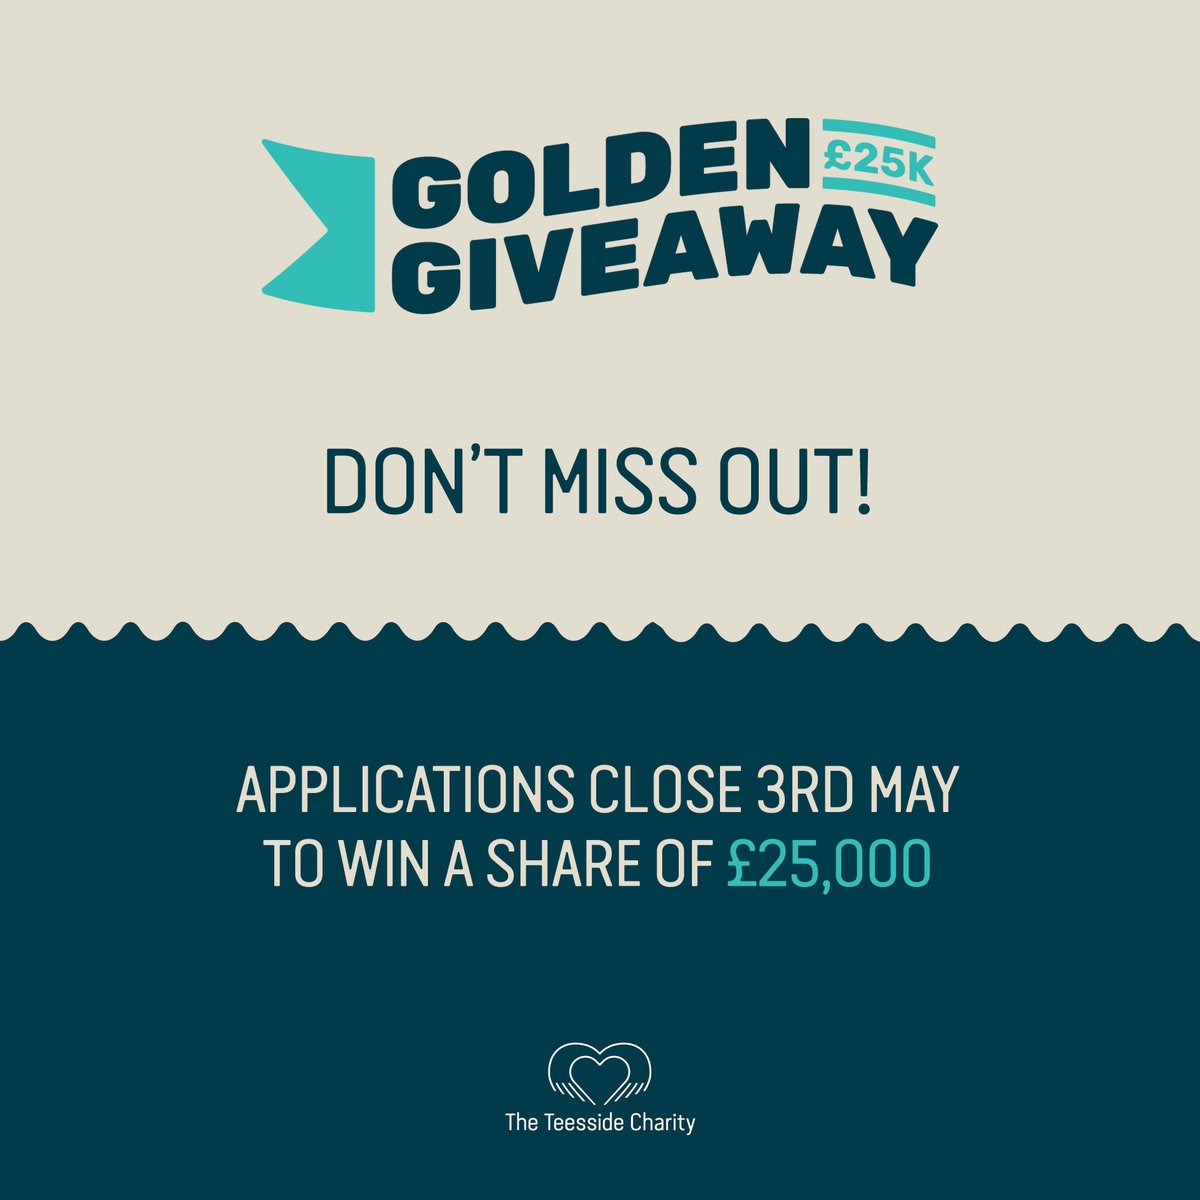 Don't miss out on your chance to win a share of £25,000 ❗ If you're a charity, not-for-profit organisation, community group or school, you have 1 WEEK left to enter our Golden Giveaway for a chance to win a share of £25,000! 👉 lnkd.in/e79PABqr